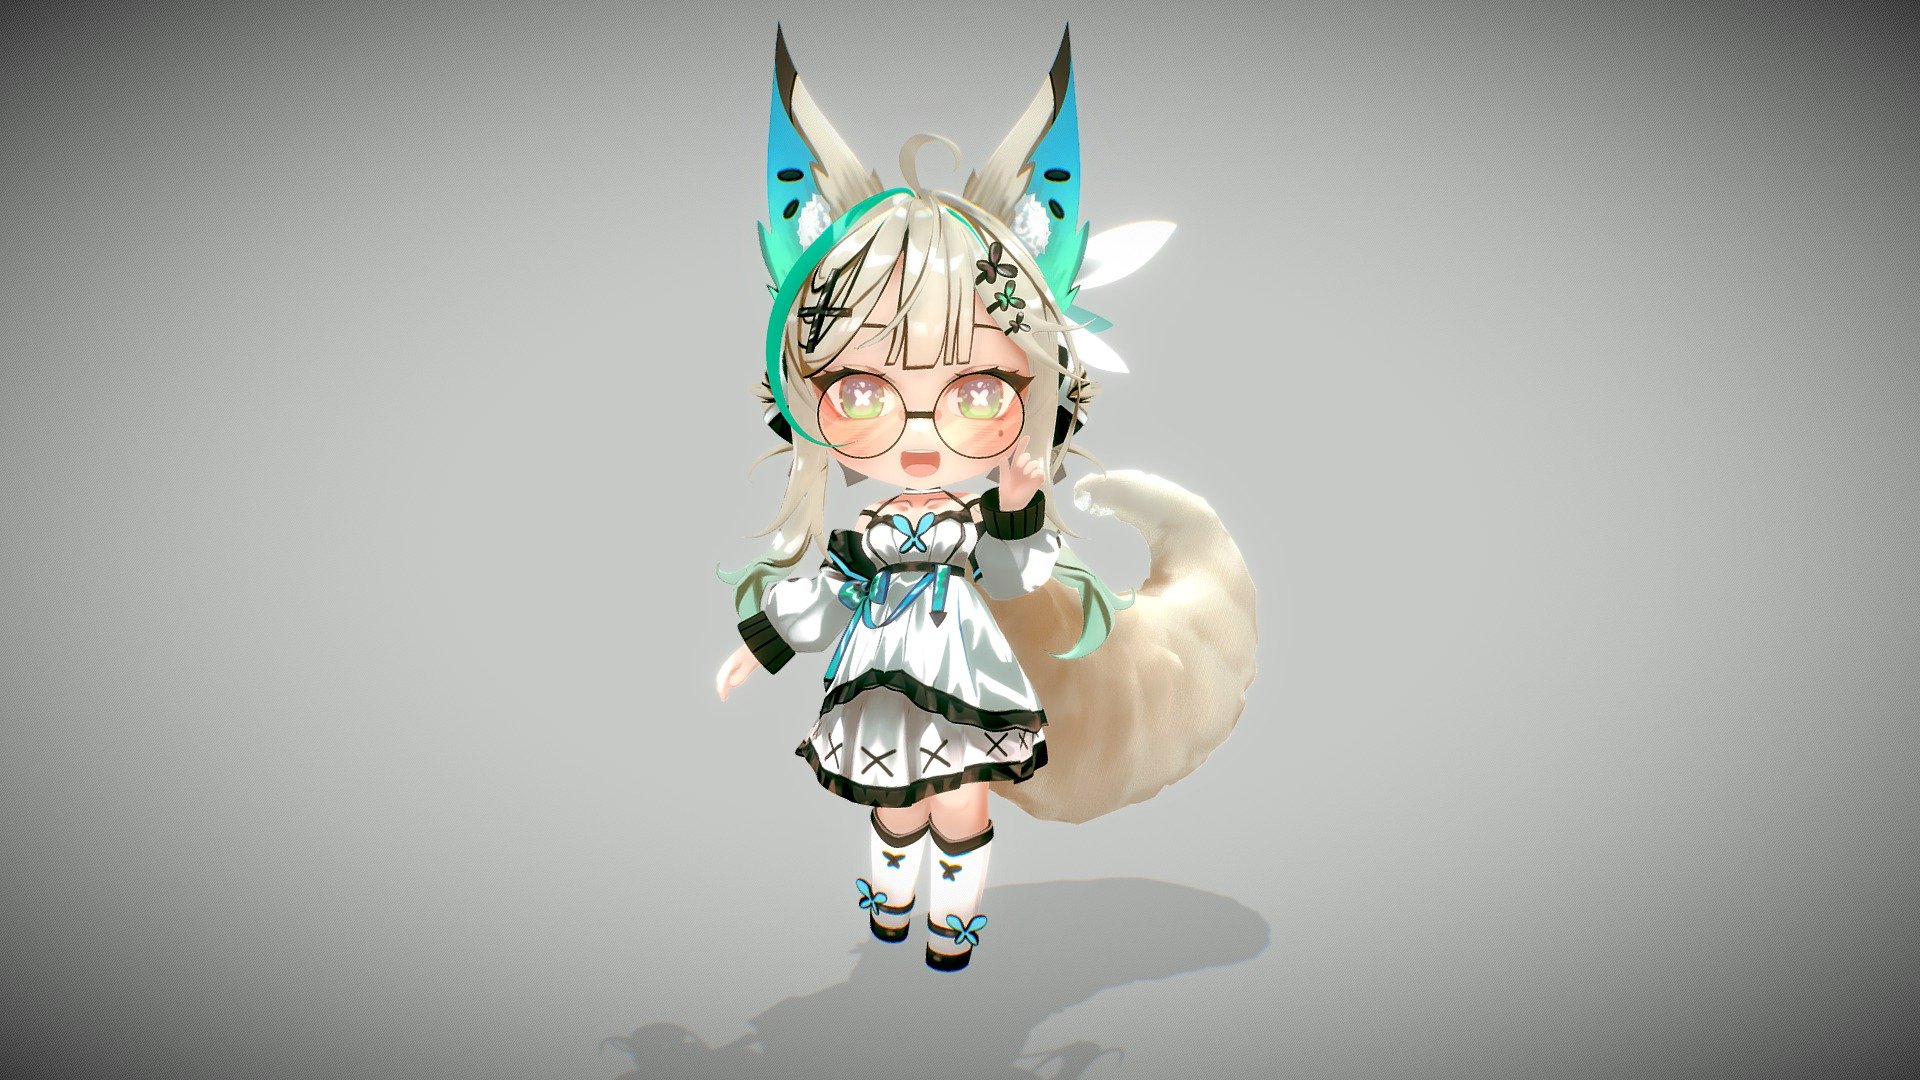 Proud to announce that Sera-Chan, a cute nekomimi chibi character, is now available on Booth ! please check link below

Dance performance : https://youtube.com/shorts/wqg3gVG1_1g?feature=shared

Turn around in unity : https://youtu.be/rlk0nvygsMk?feature=shared - Sera-Chan [Chibi] Original Character - 3D model by vandrstudio.en 3d model